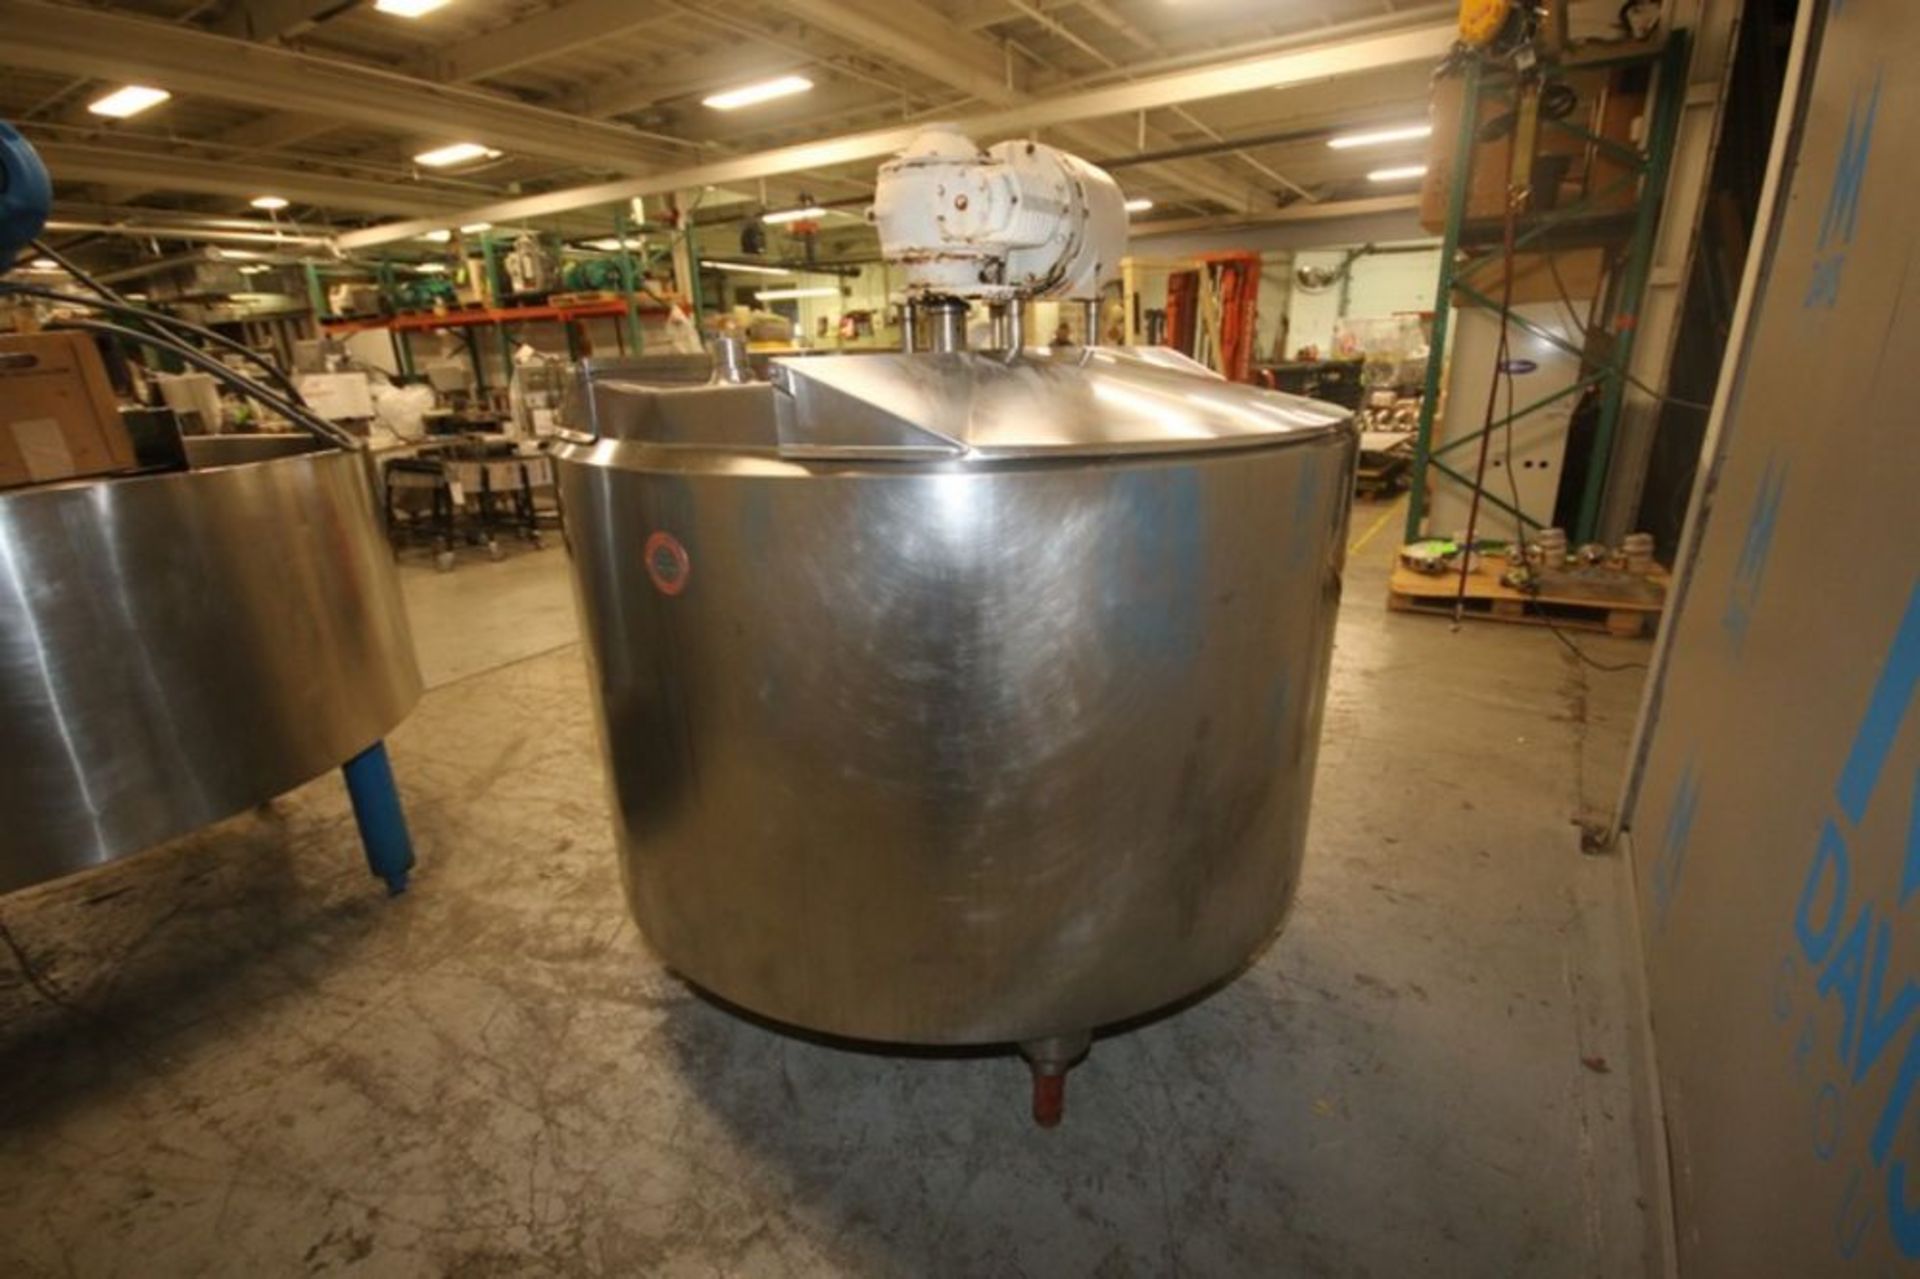 Cherry-Burrell 500 Gal. S/S Processor, M/N ECT, S/N 500-58-105, with Jacket & Dish Bottom, with S/ - Image 3 of 18